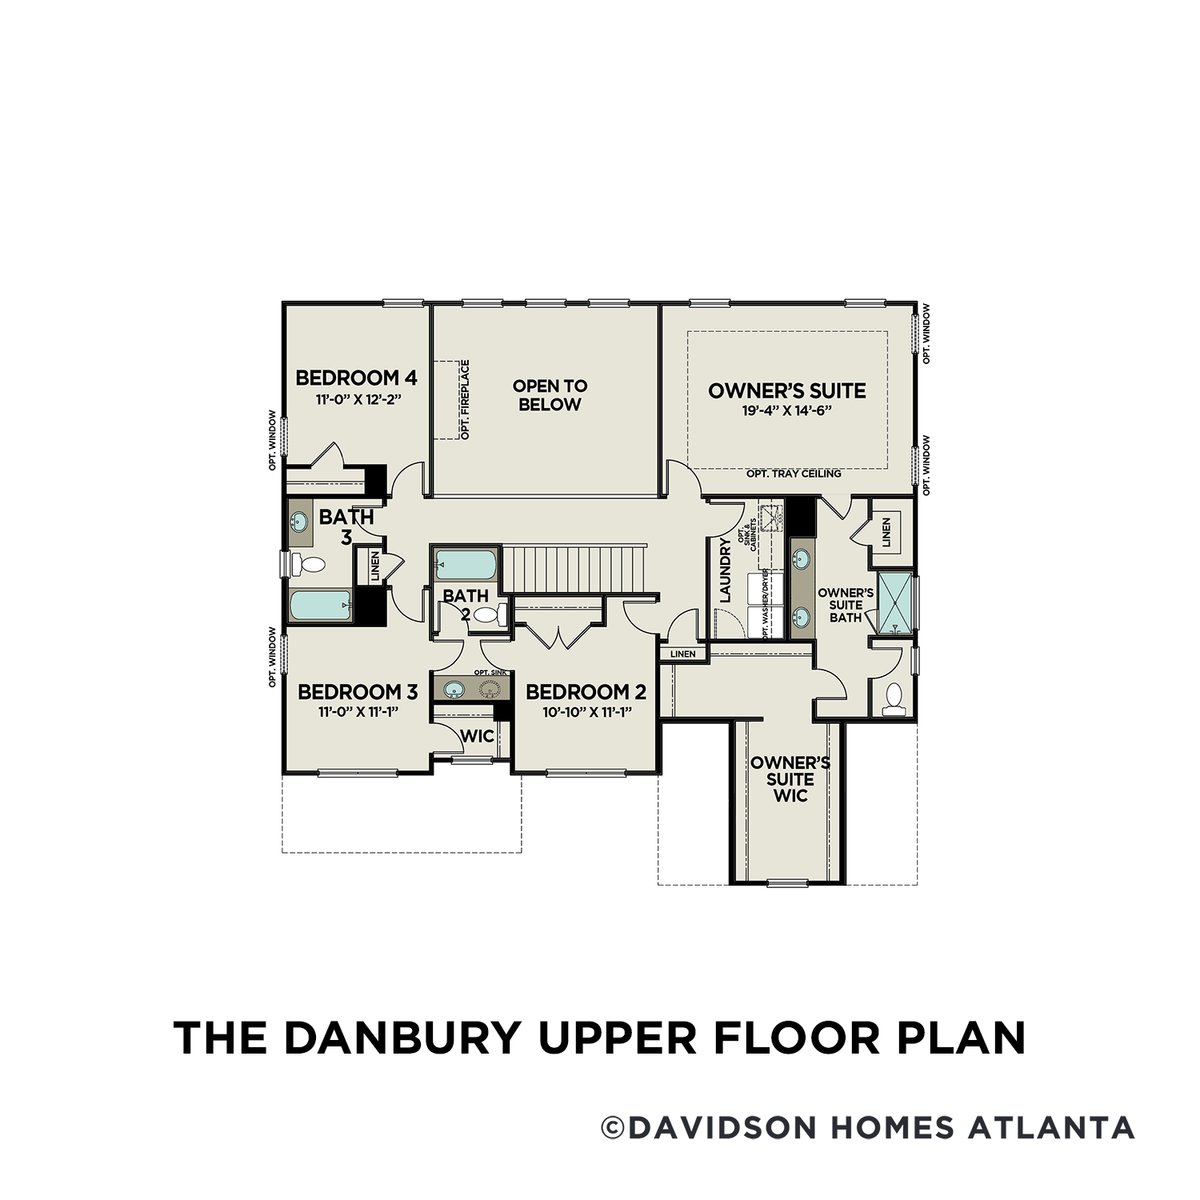 2 - The Danbury C floor plan layout for 5130 Shipley Avenue in Davidson Homes' Cooper Place community.